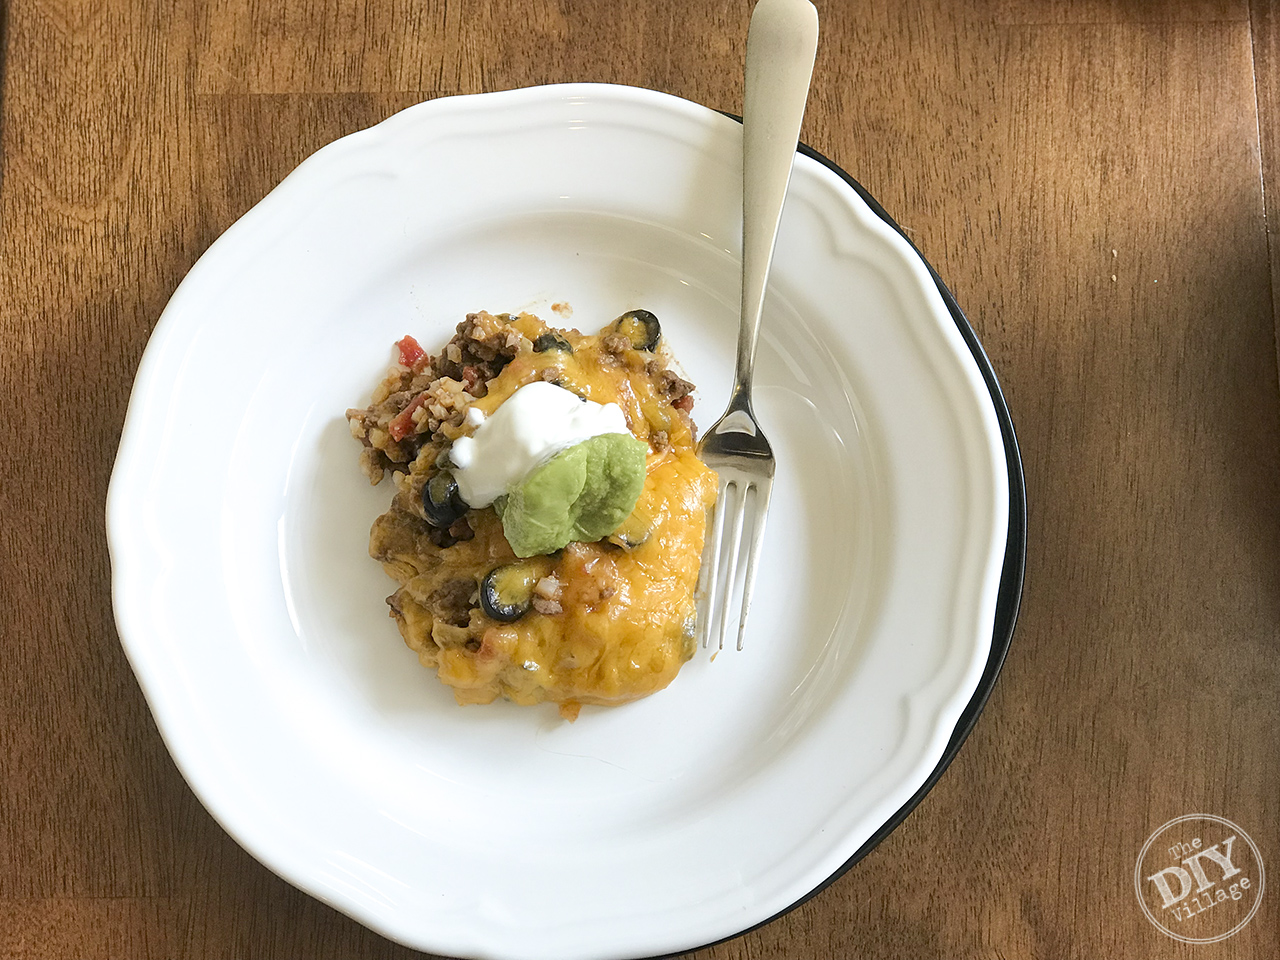 Low carb mexican casserole with riced cauliflower - keto friendly #keto #lowcarb #ricedcauliflower #healthy #ketodiet #recipes #familyfriendly #mexican